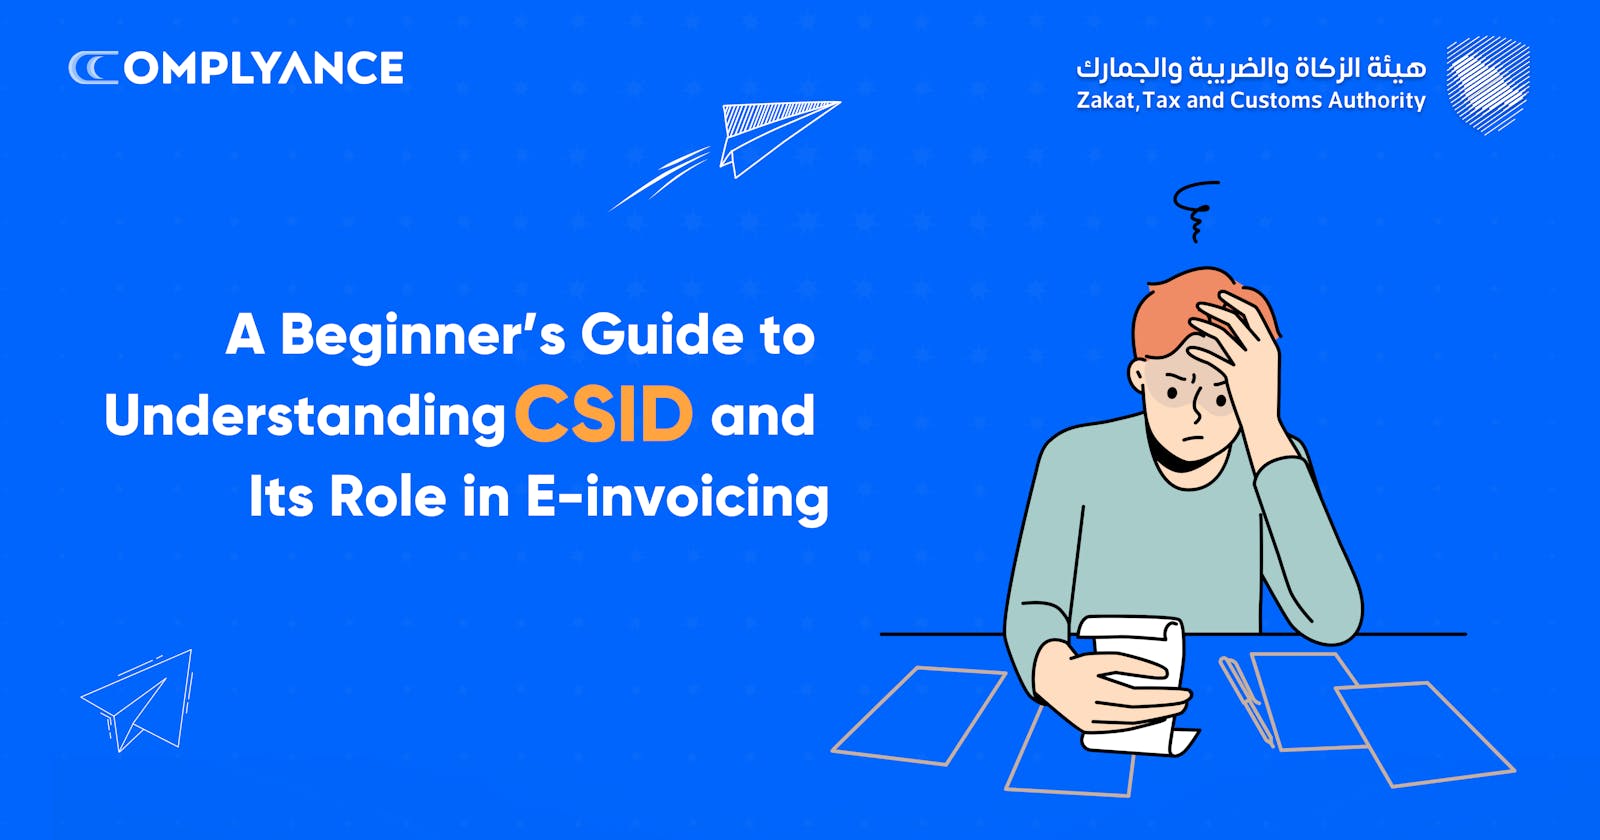 CSID and Its Role in E-invoicing